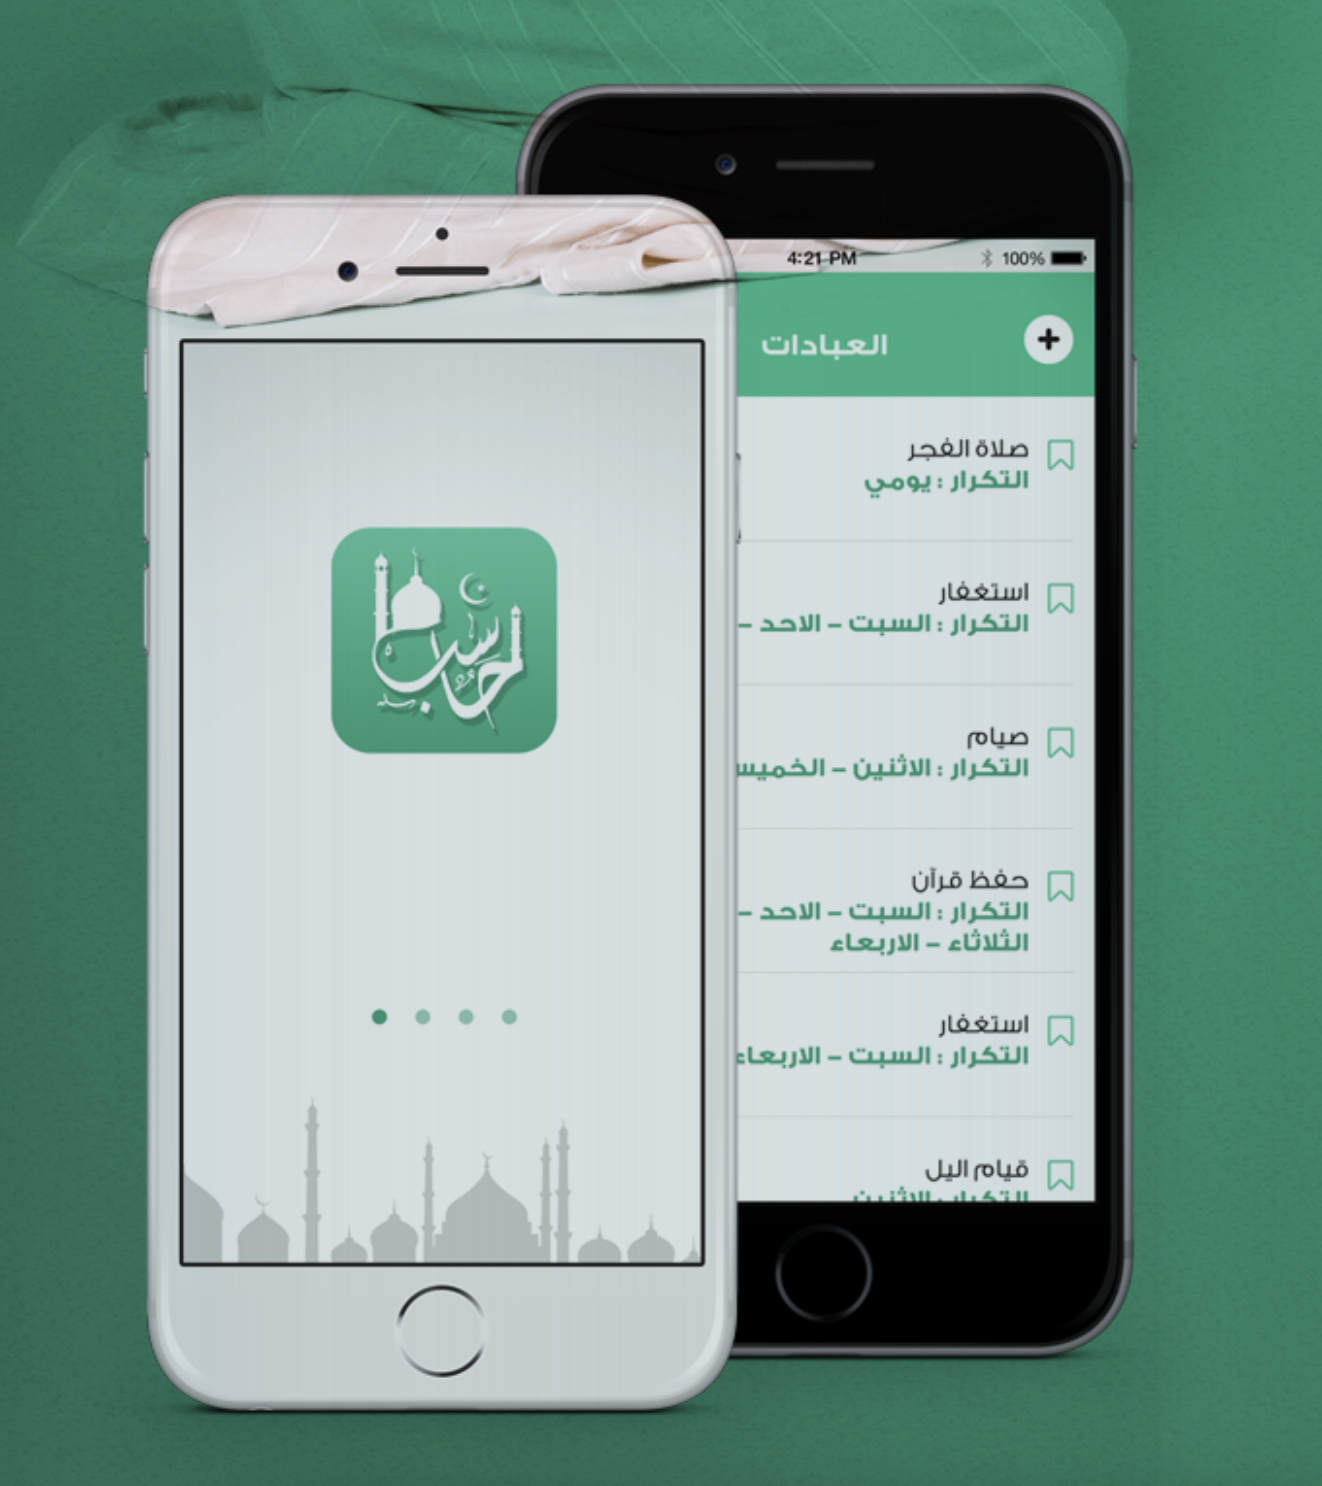 A program to track your Islamic prayers for you and make it easier.